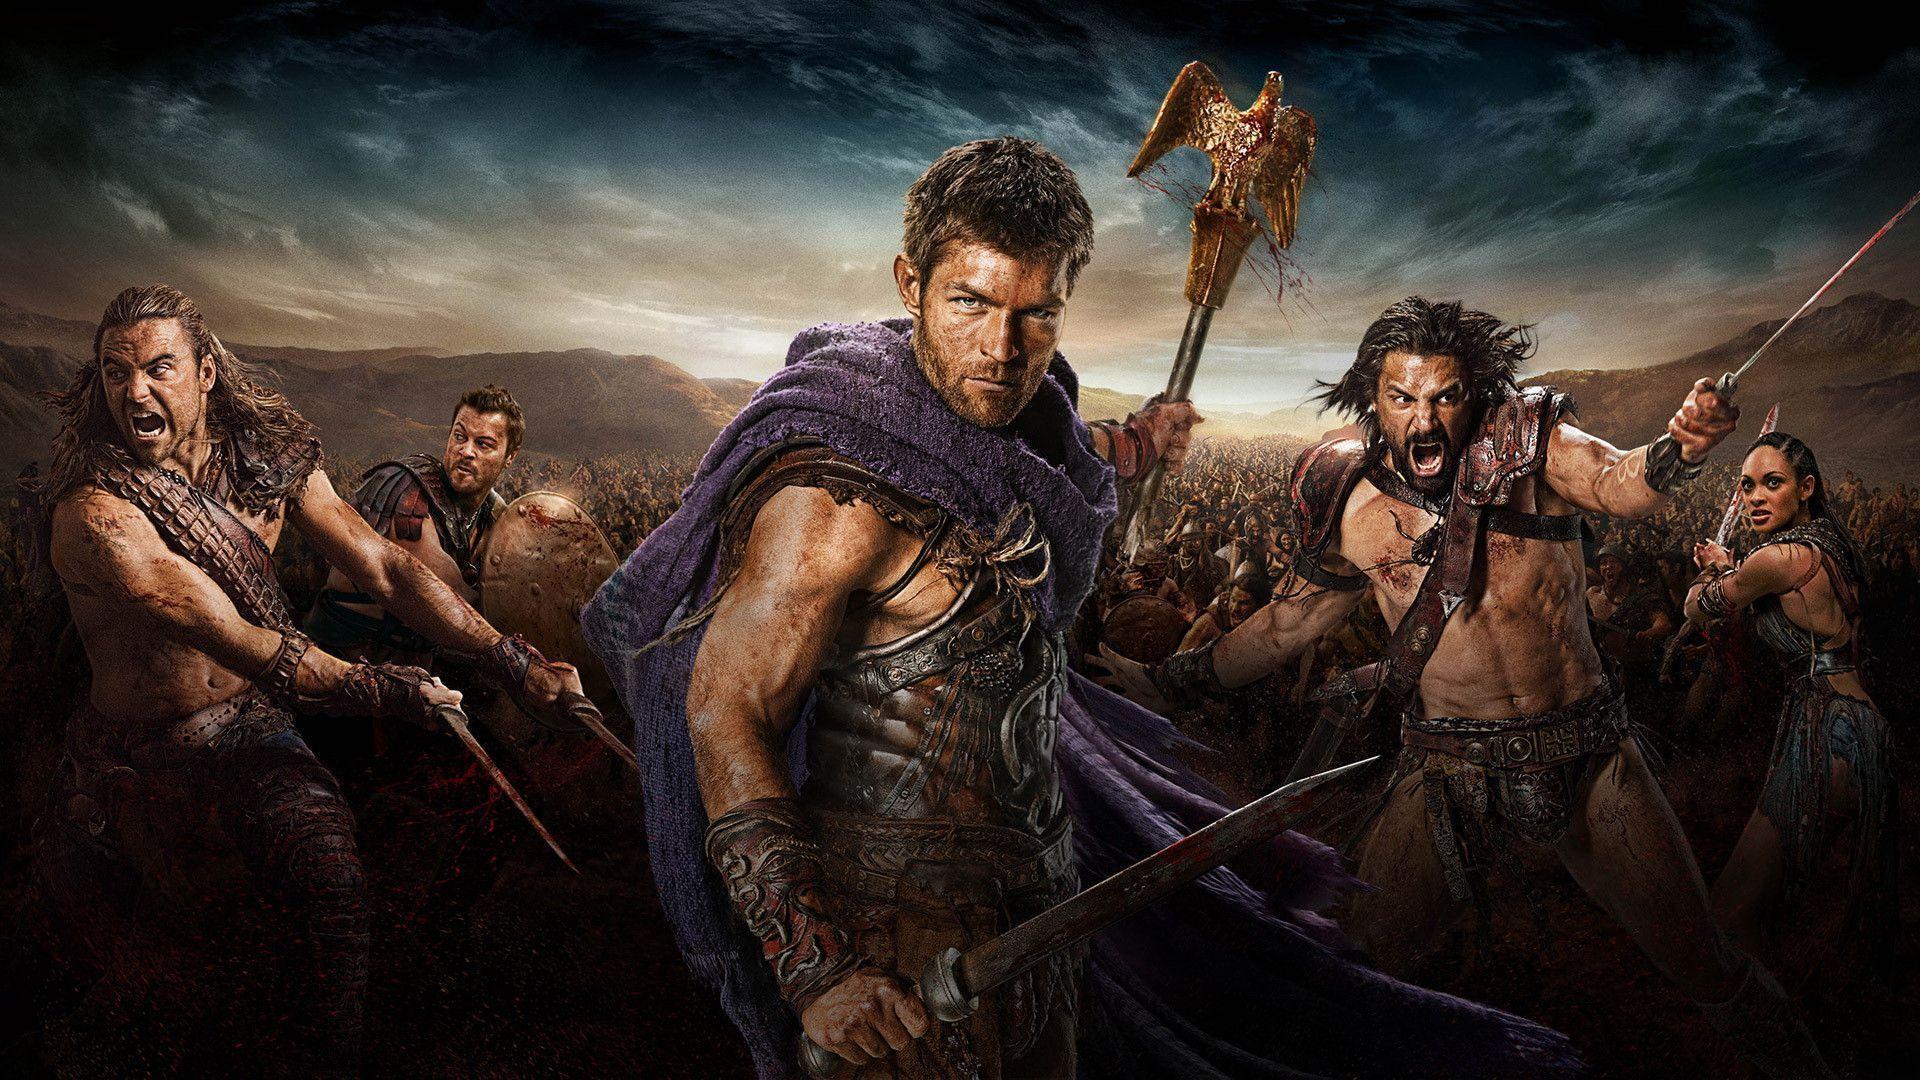 Spartacus War of the Damned 2013 hd-streamsorg